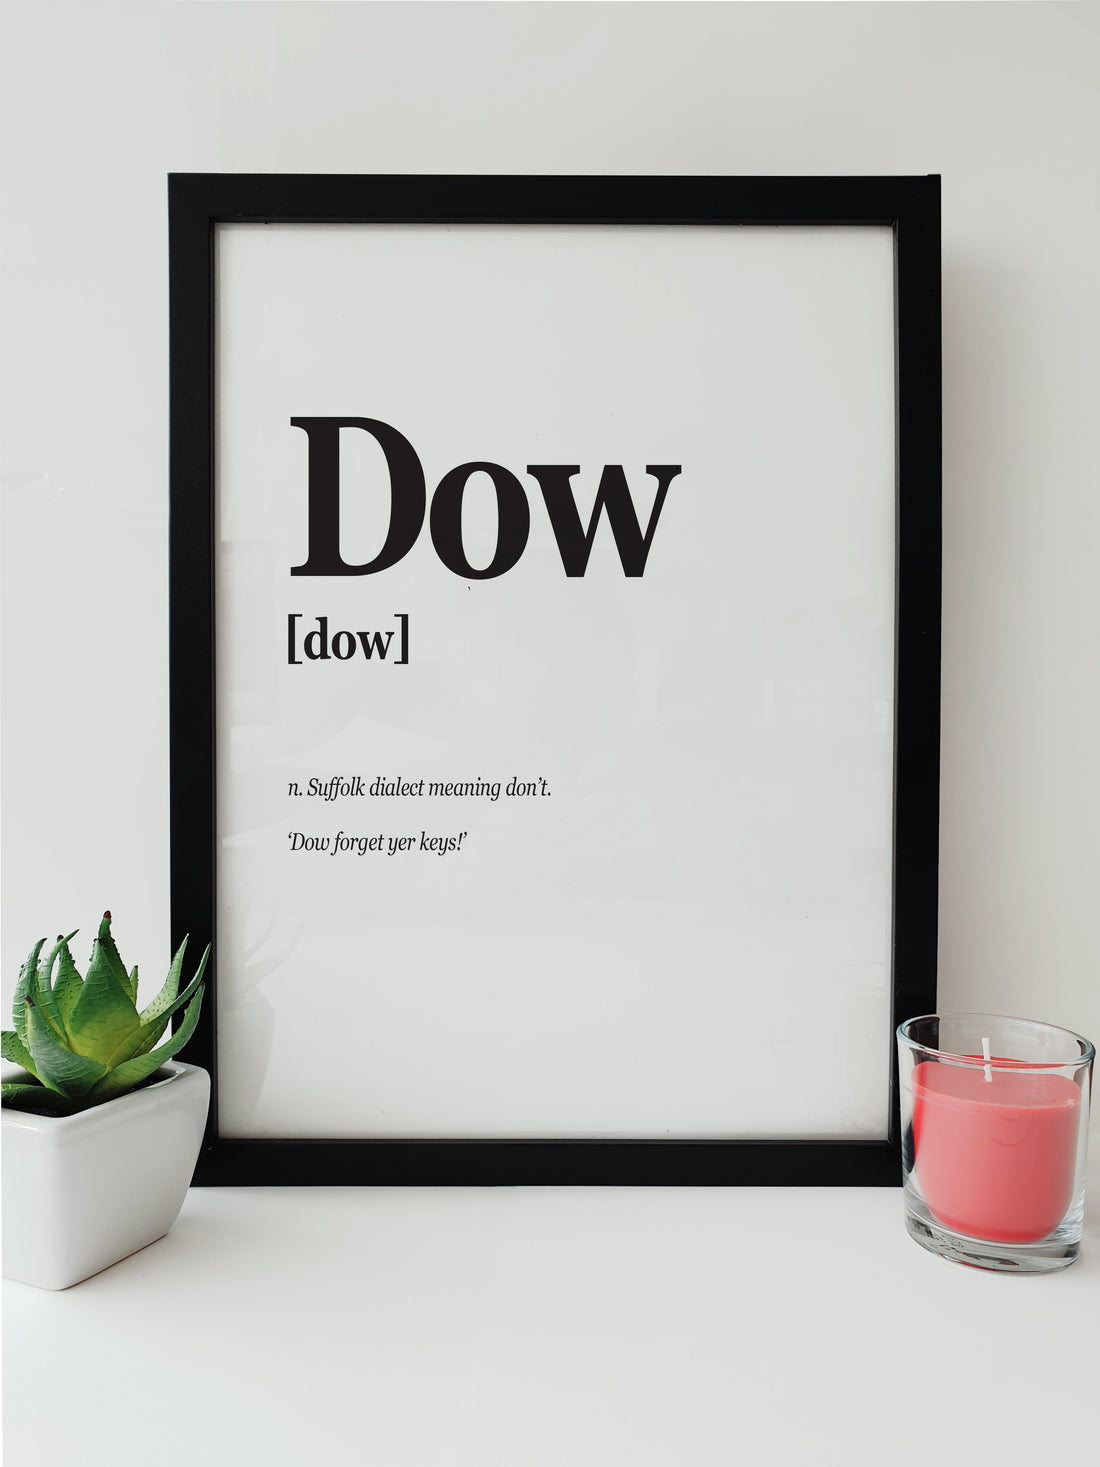 Art print featuring the word 'Dow' from Suffolk dialect, meaning don't, with the phrase 'Dow forget yer keys!' in a modern, minimalistic black and white design. Local Lingo